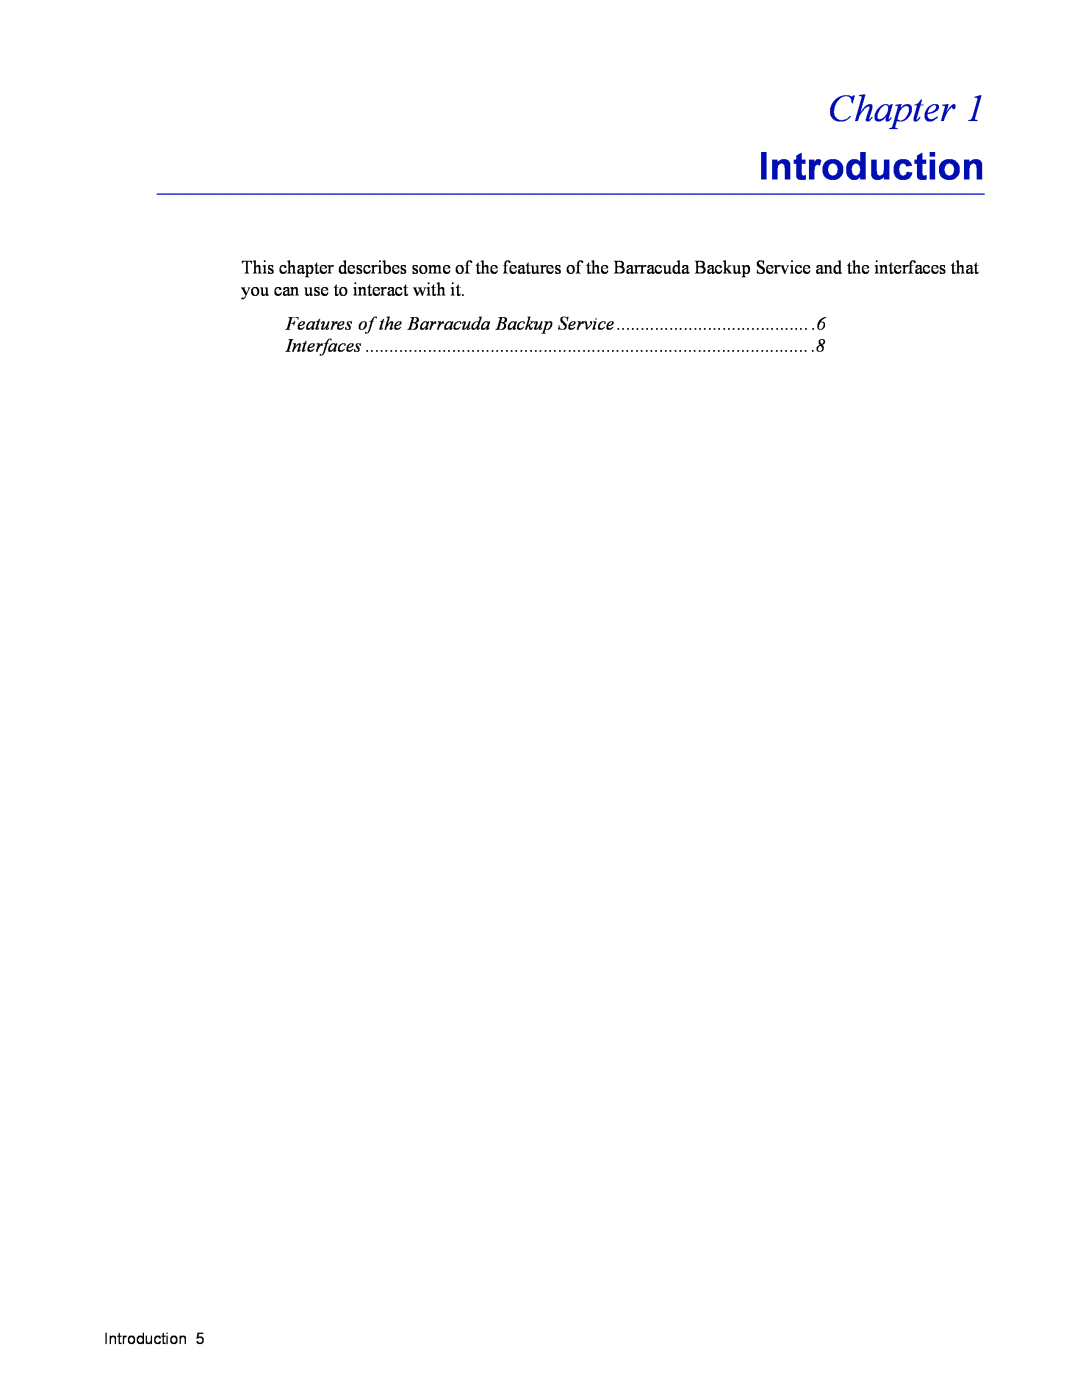 Barracuda Networks 4 manual Chapter, Introduction 